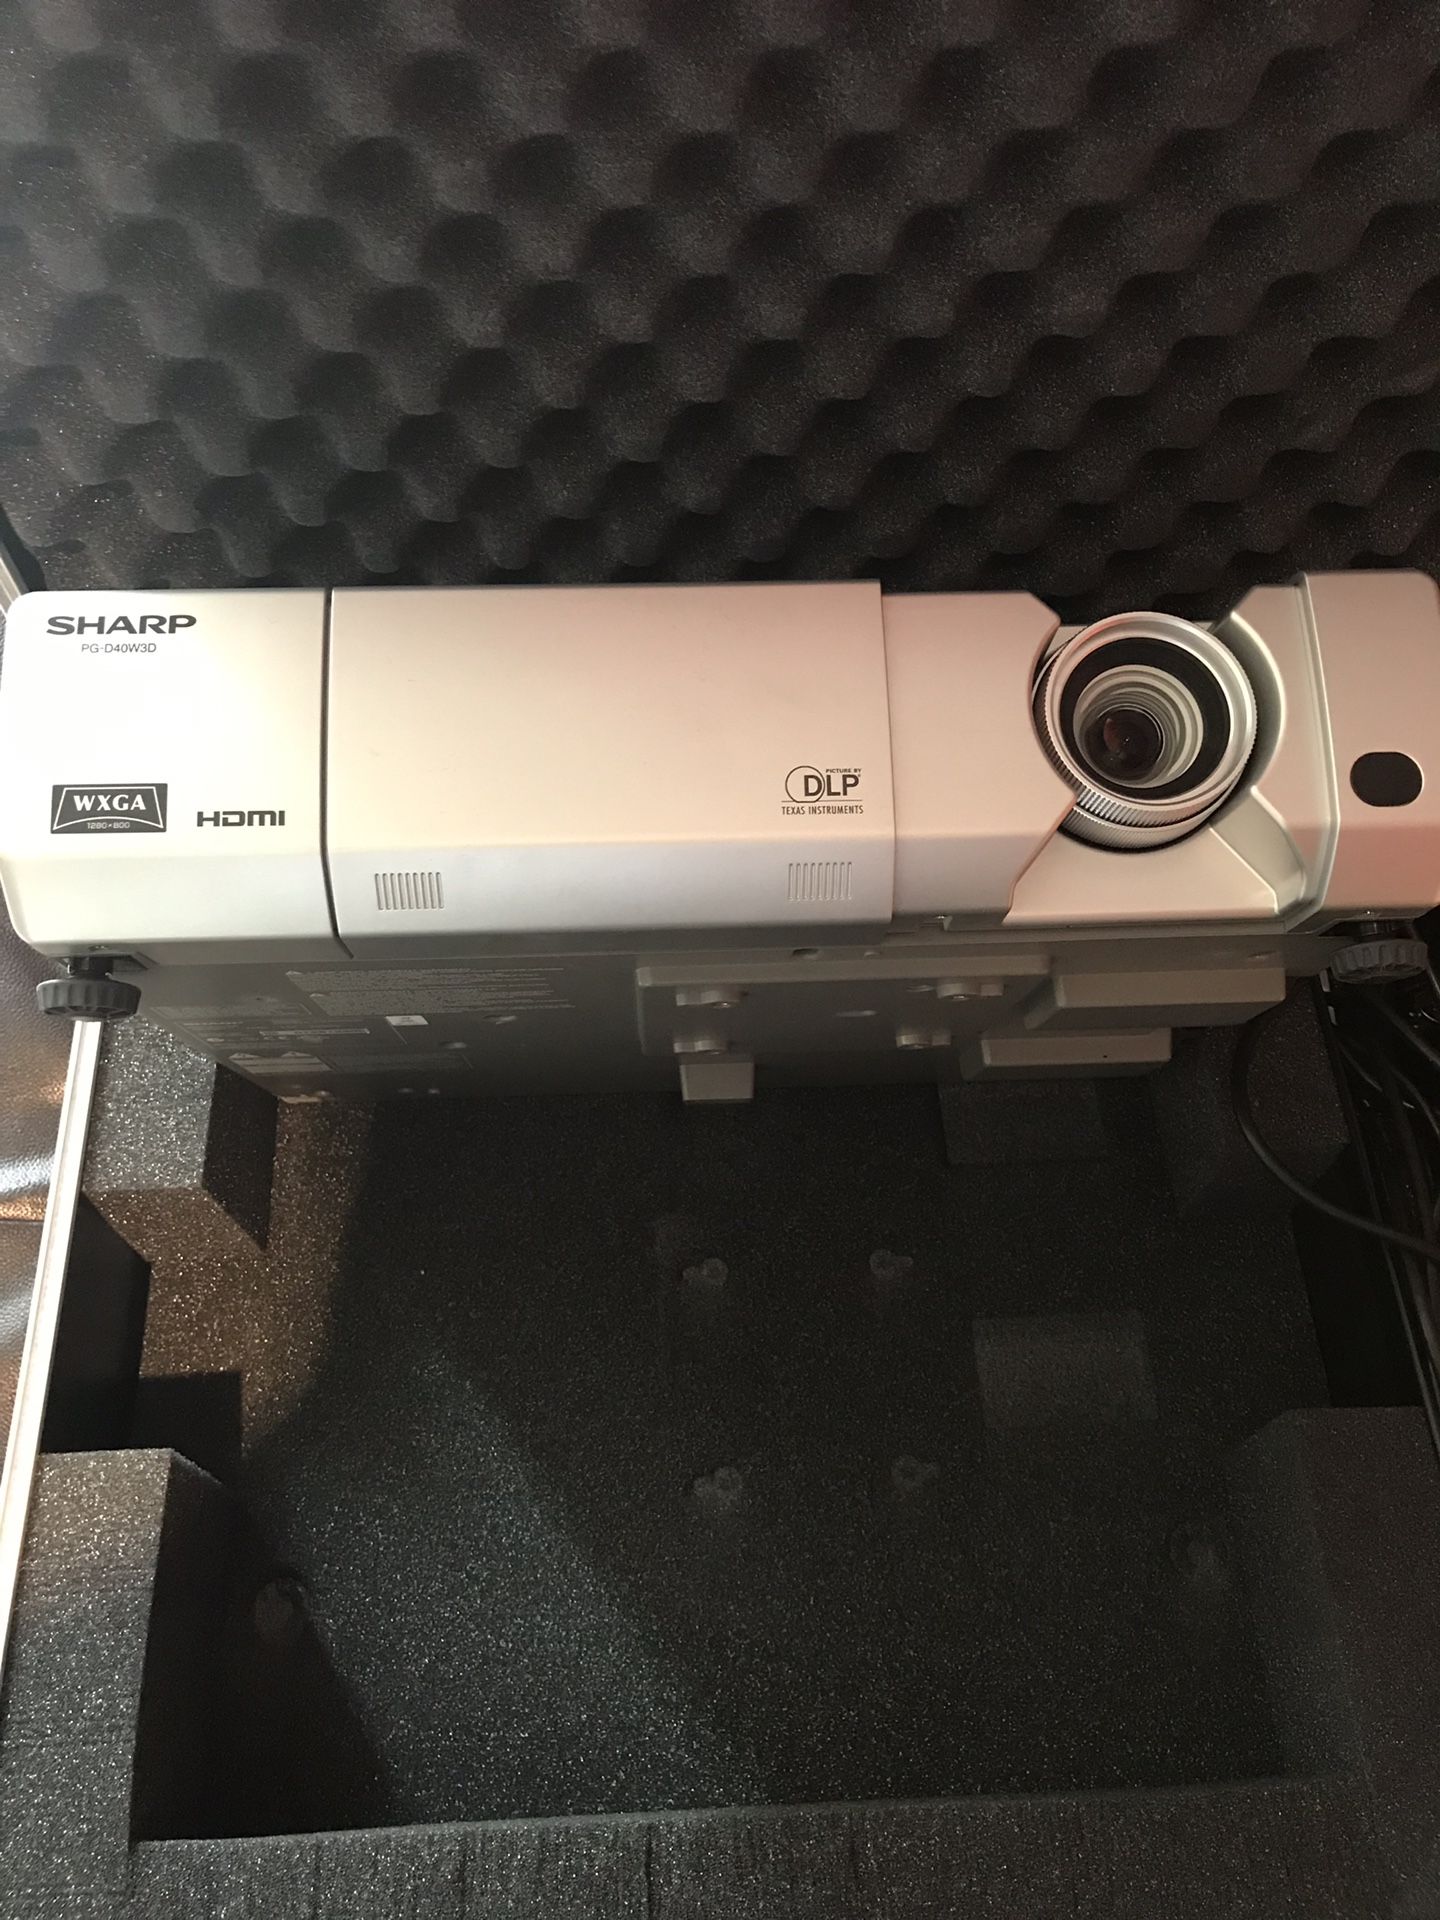 Barely used sharp projector in case